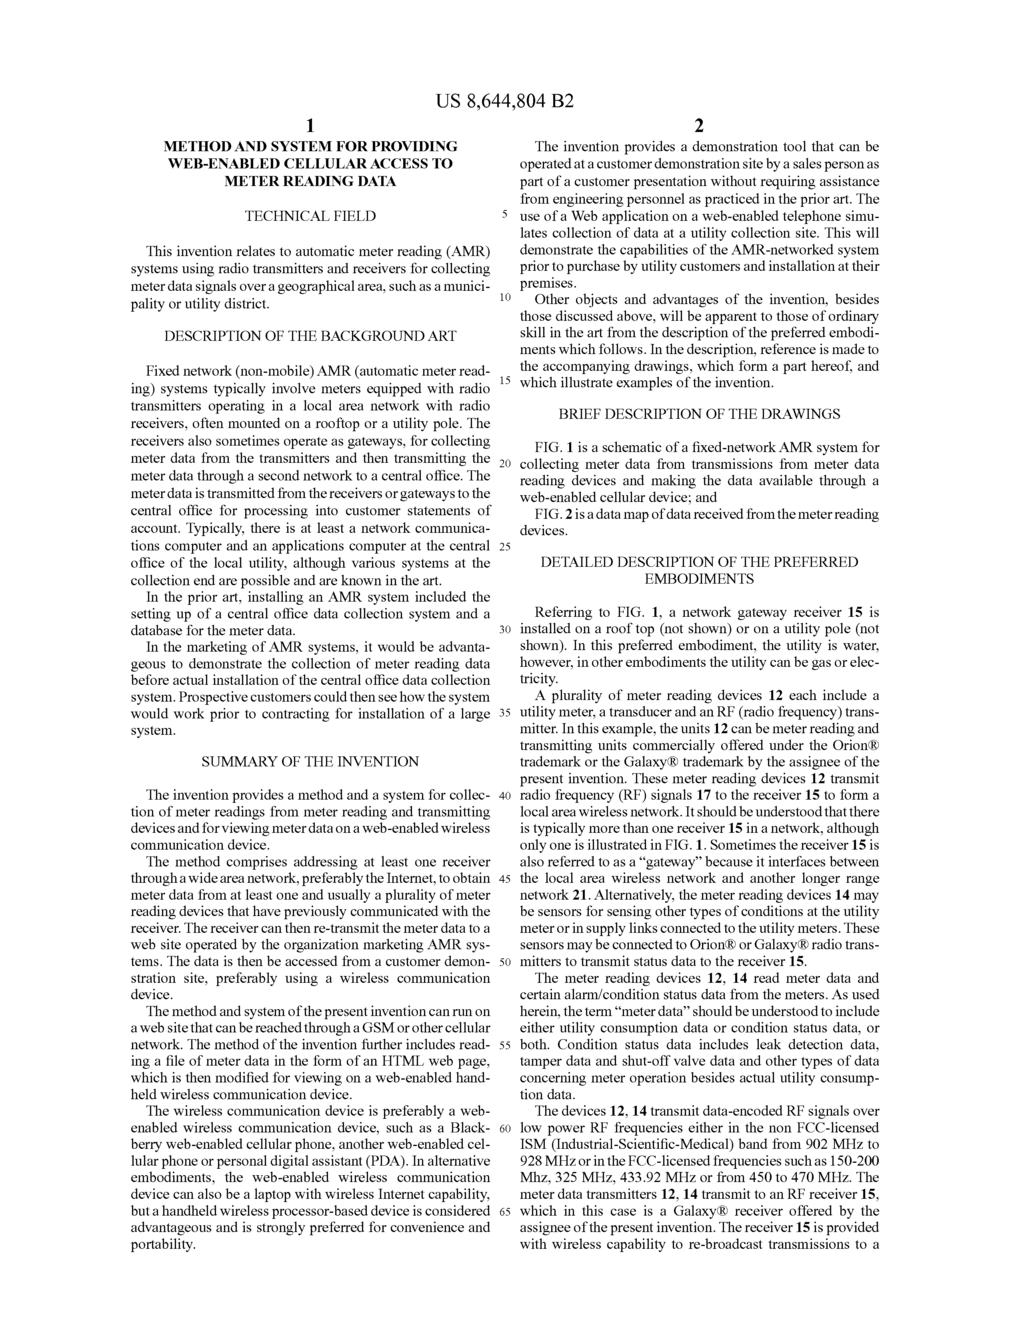 1. METHOD AND SYSTEM FOR PROVIDING WEB-ENABLED CELLULAR ACCESS TO METER READING DATA TECHNICAL FIELD This invention relates to automatic meter reading (AMR) systems using radio transmitters and